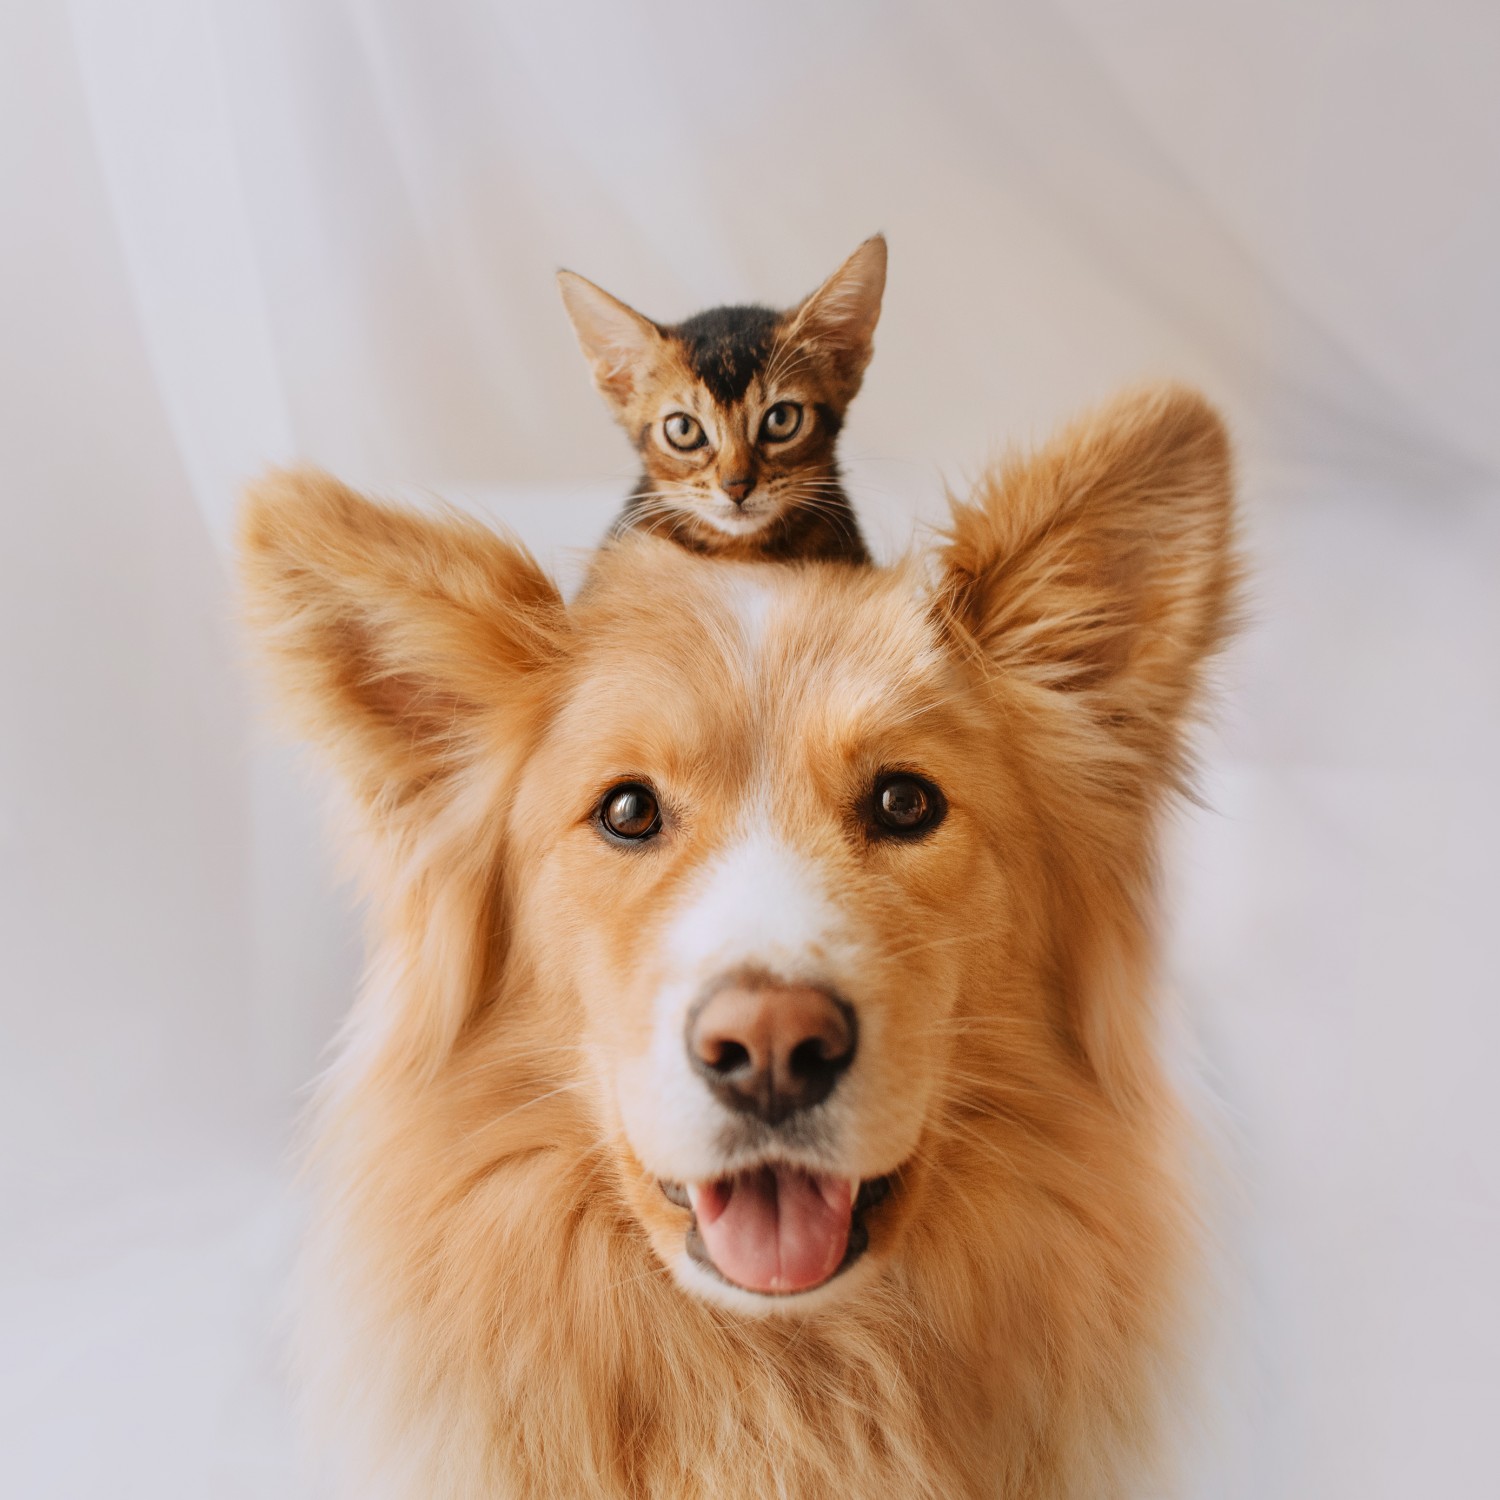 Dog with cat on his head